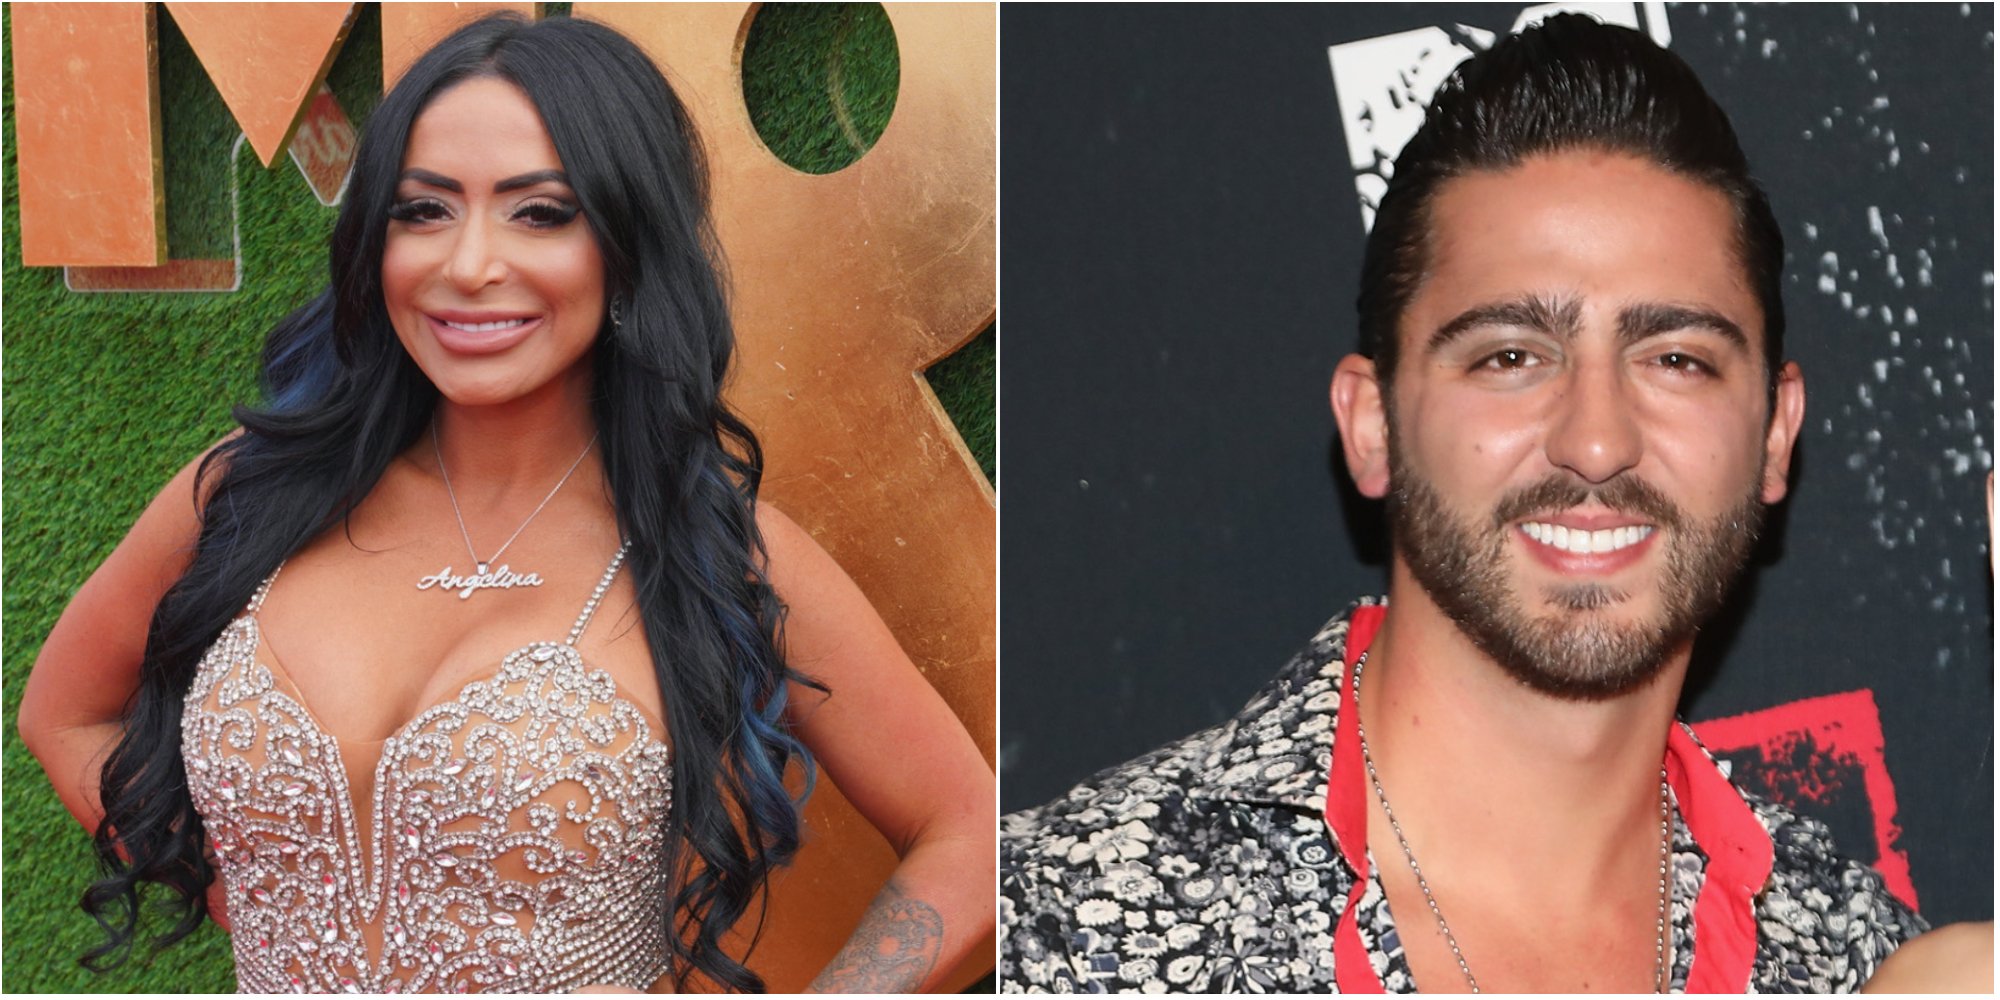 Angelina Pivarnick at the MTV Movie and TV awards; Luis 'Potro' Caballero at an event for 'Jersey Shore: Family Vacation' in 2018